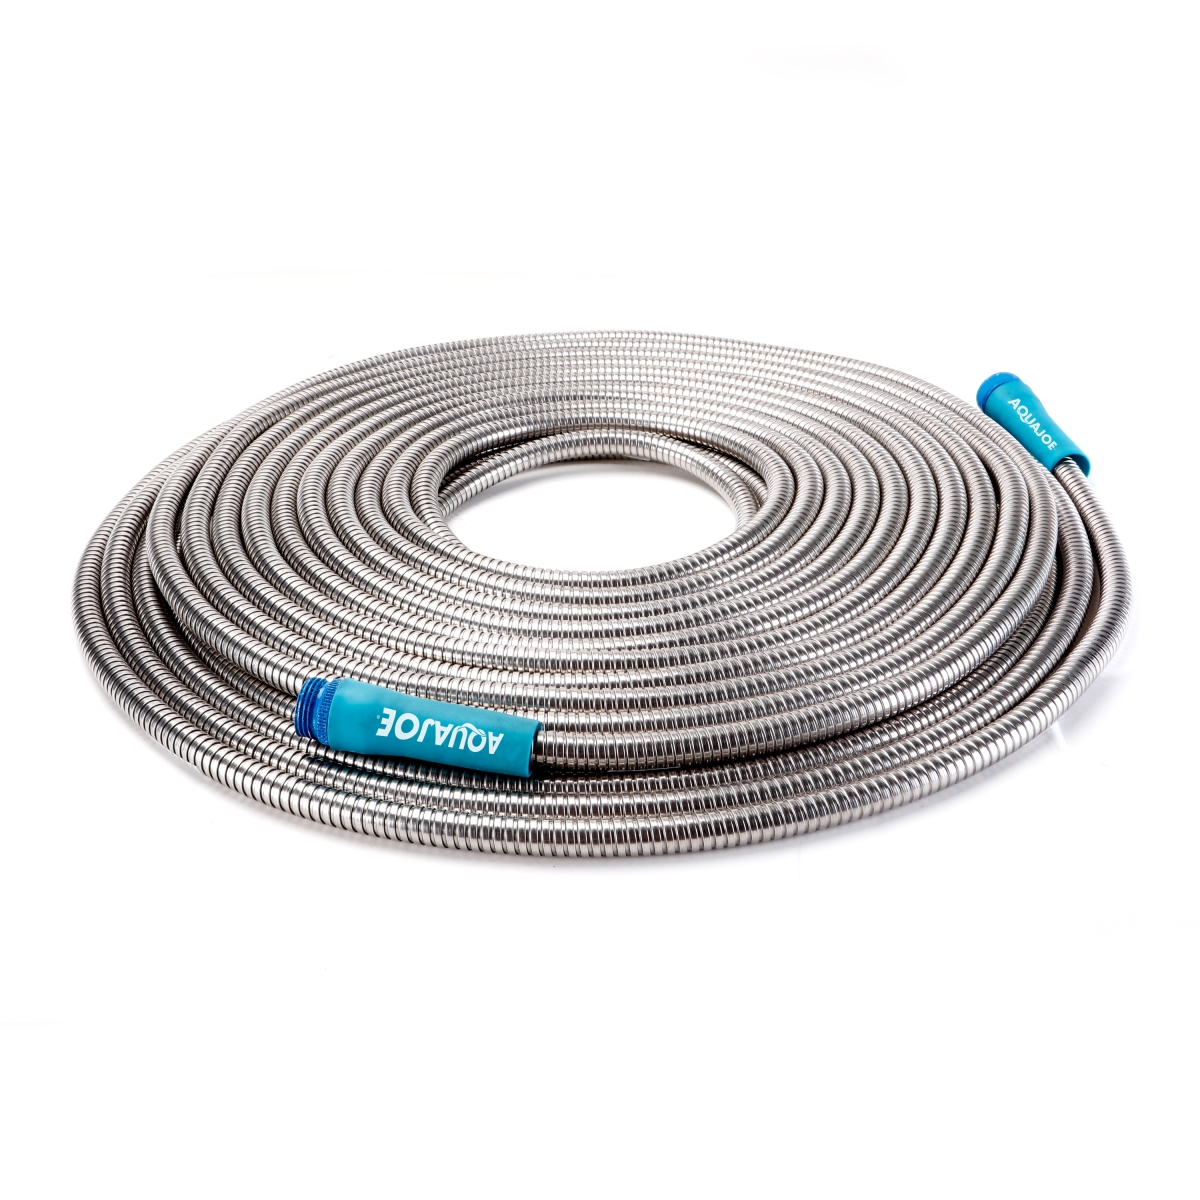 Ajsgh75 75 Ft. Heavy-duty Spiral Constructed Metal Garden Hose Stainless Steel